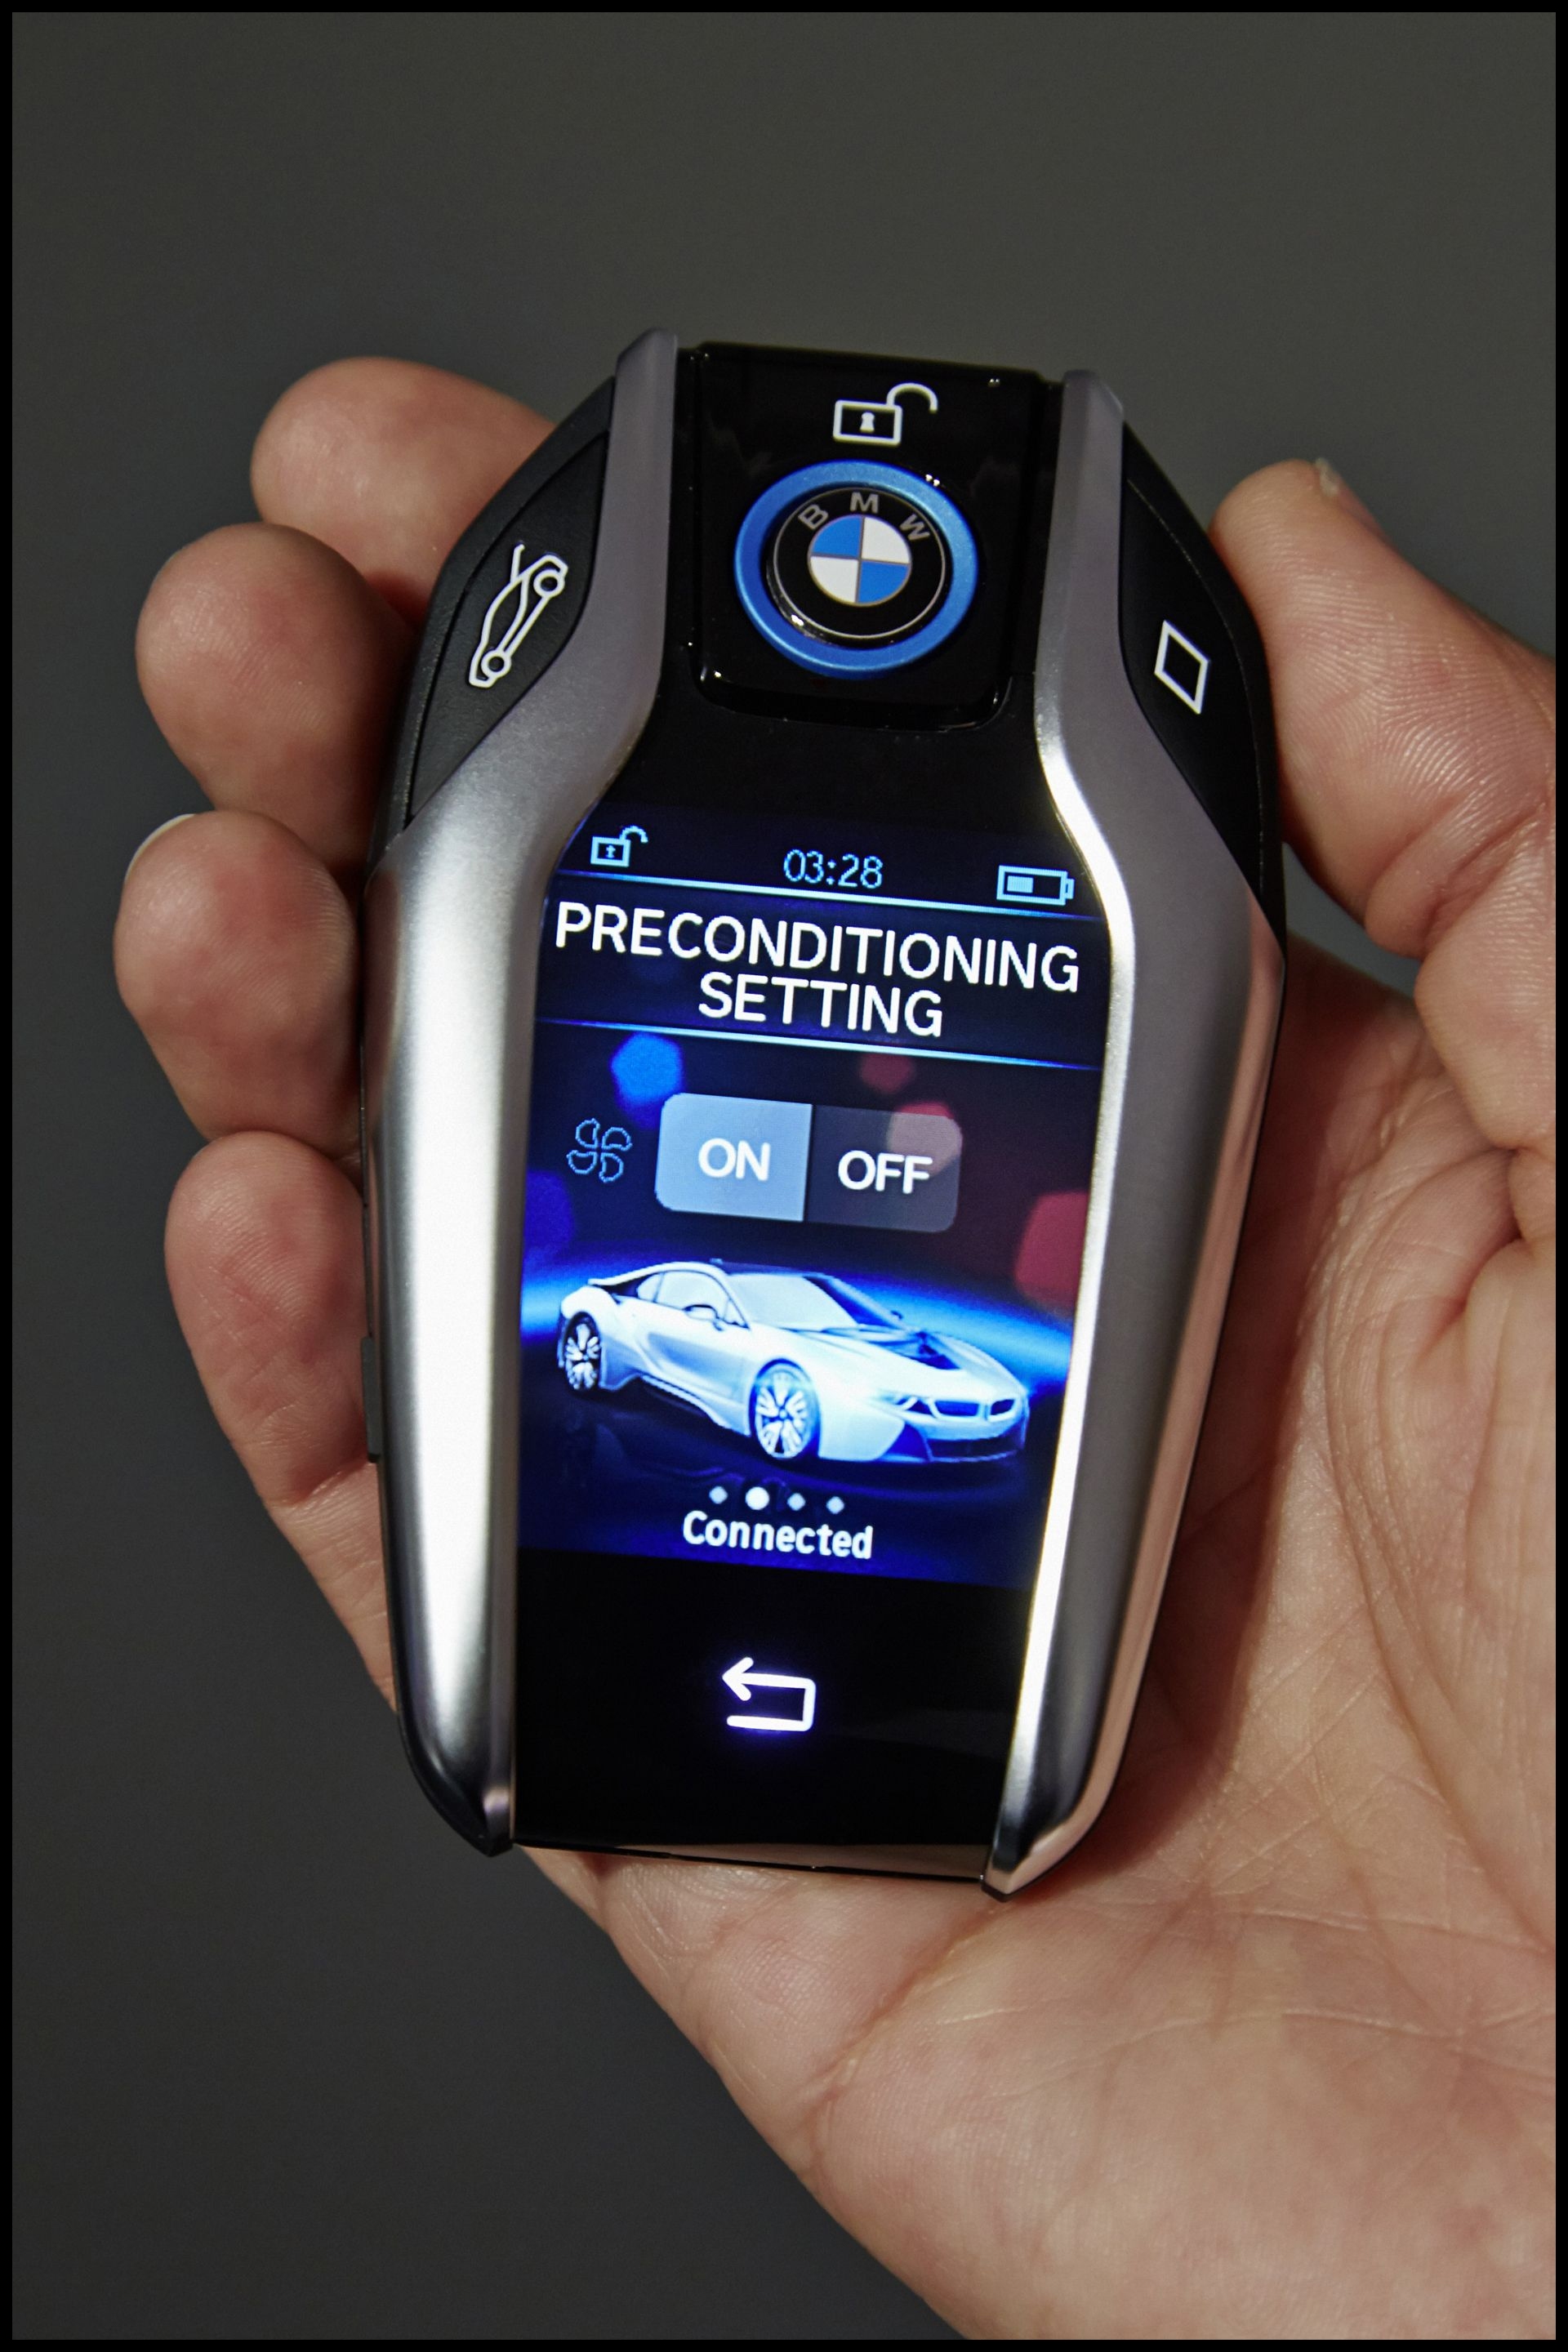 The new BMW Key fob with display This has to be the most advanced car key out there